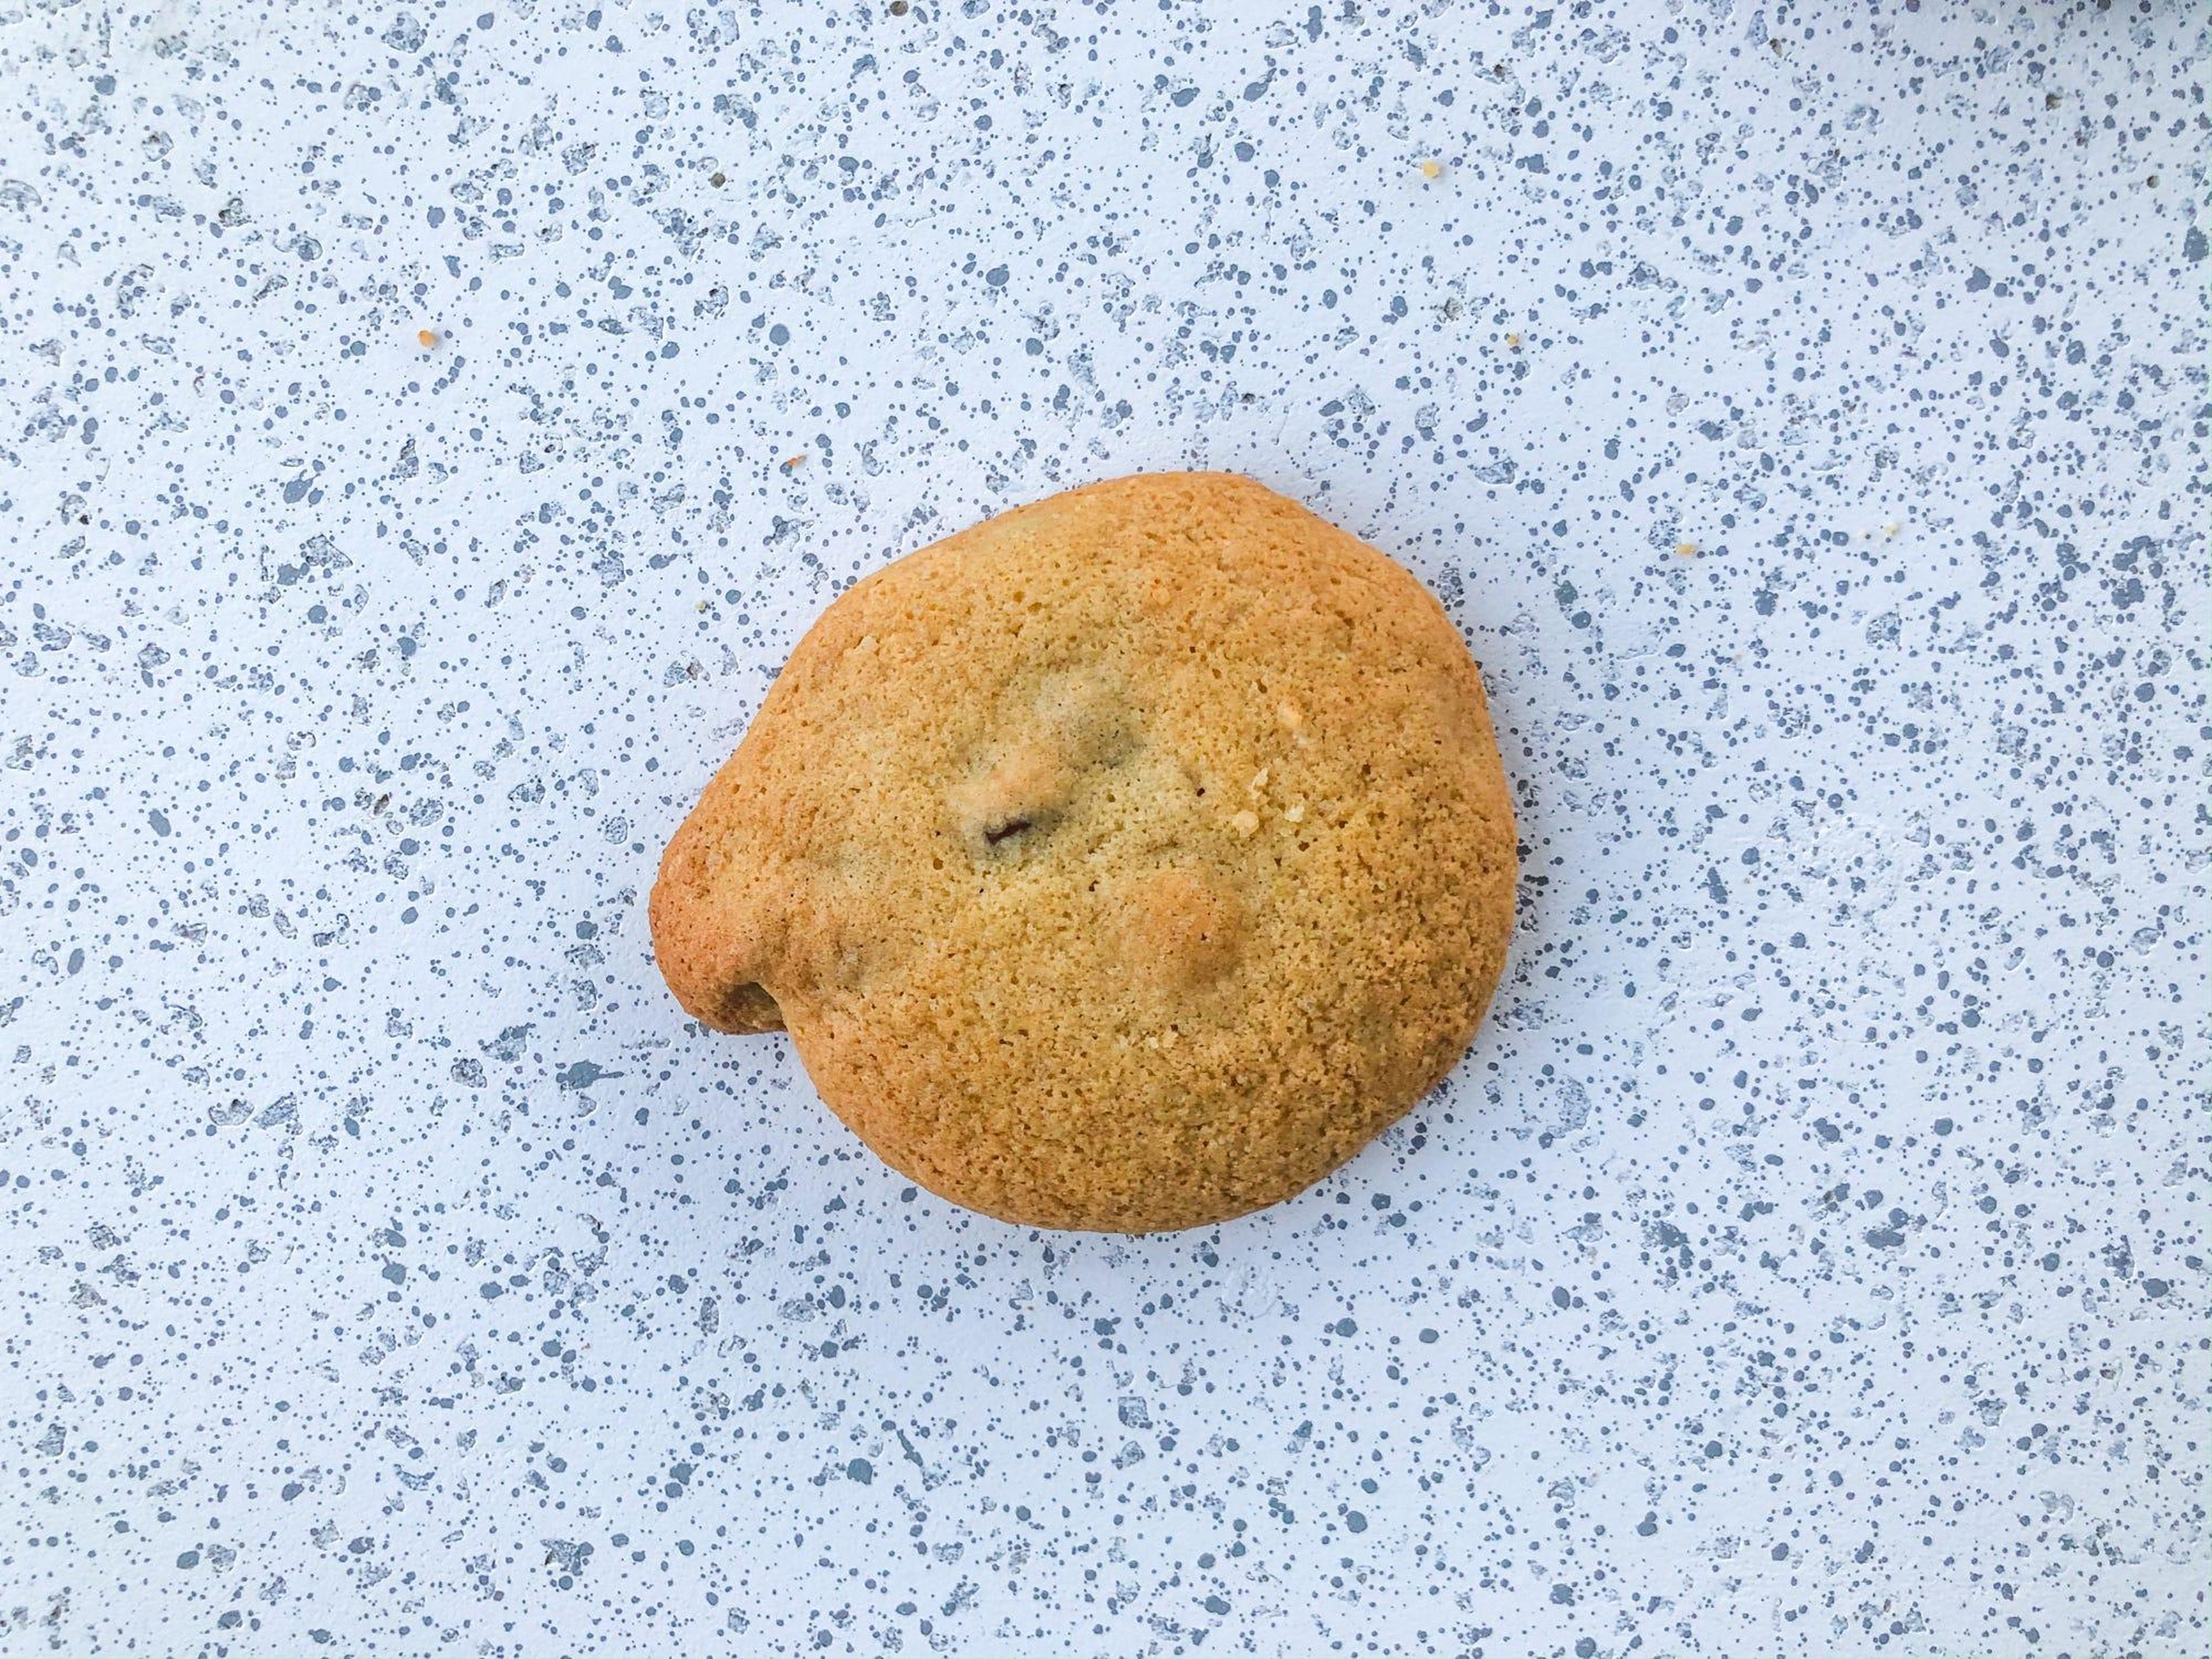 A cookie with too little butter.